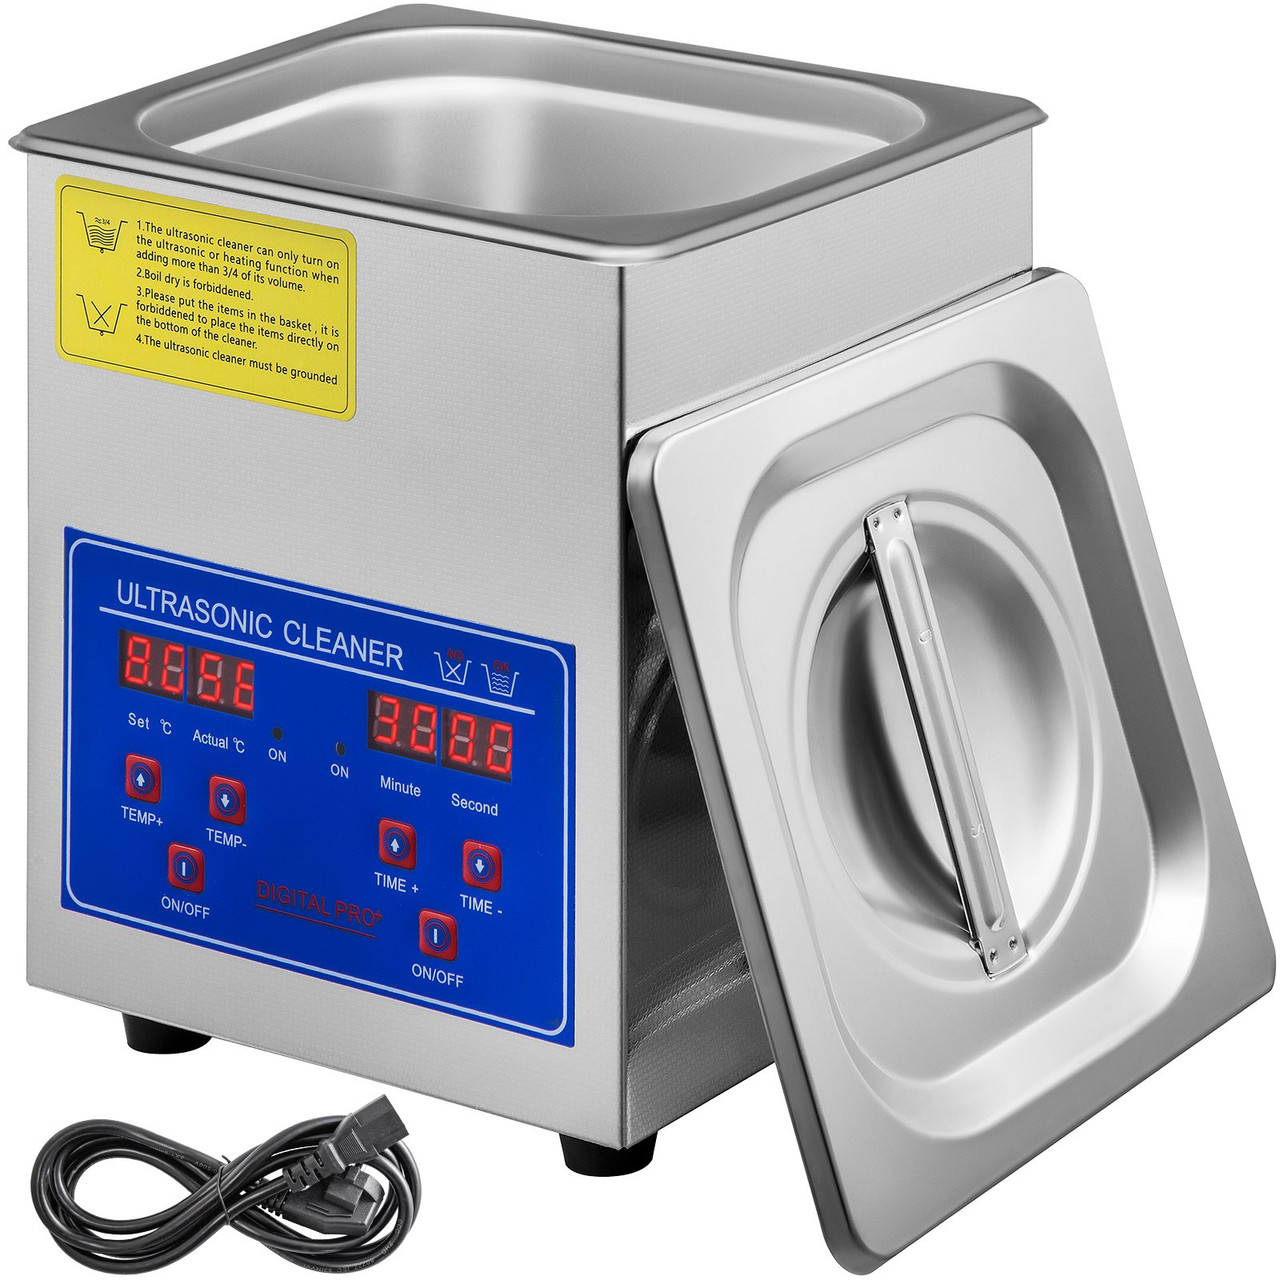 Ultrasonic Cleaner 1.3L Professional Ultrasonic Cleaner with Digital Timer 40kHz Excellent Ultrasonic Cleaning Machine 110V for Jewelry Watch Ring Coin Diamond Eyeglasses Small Parts Cleaning